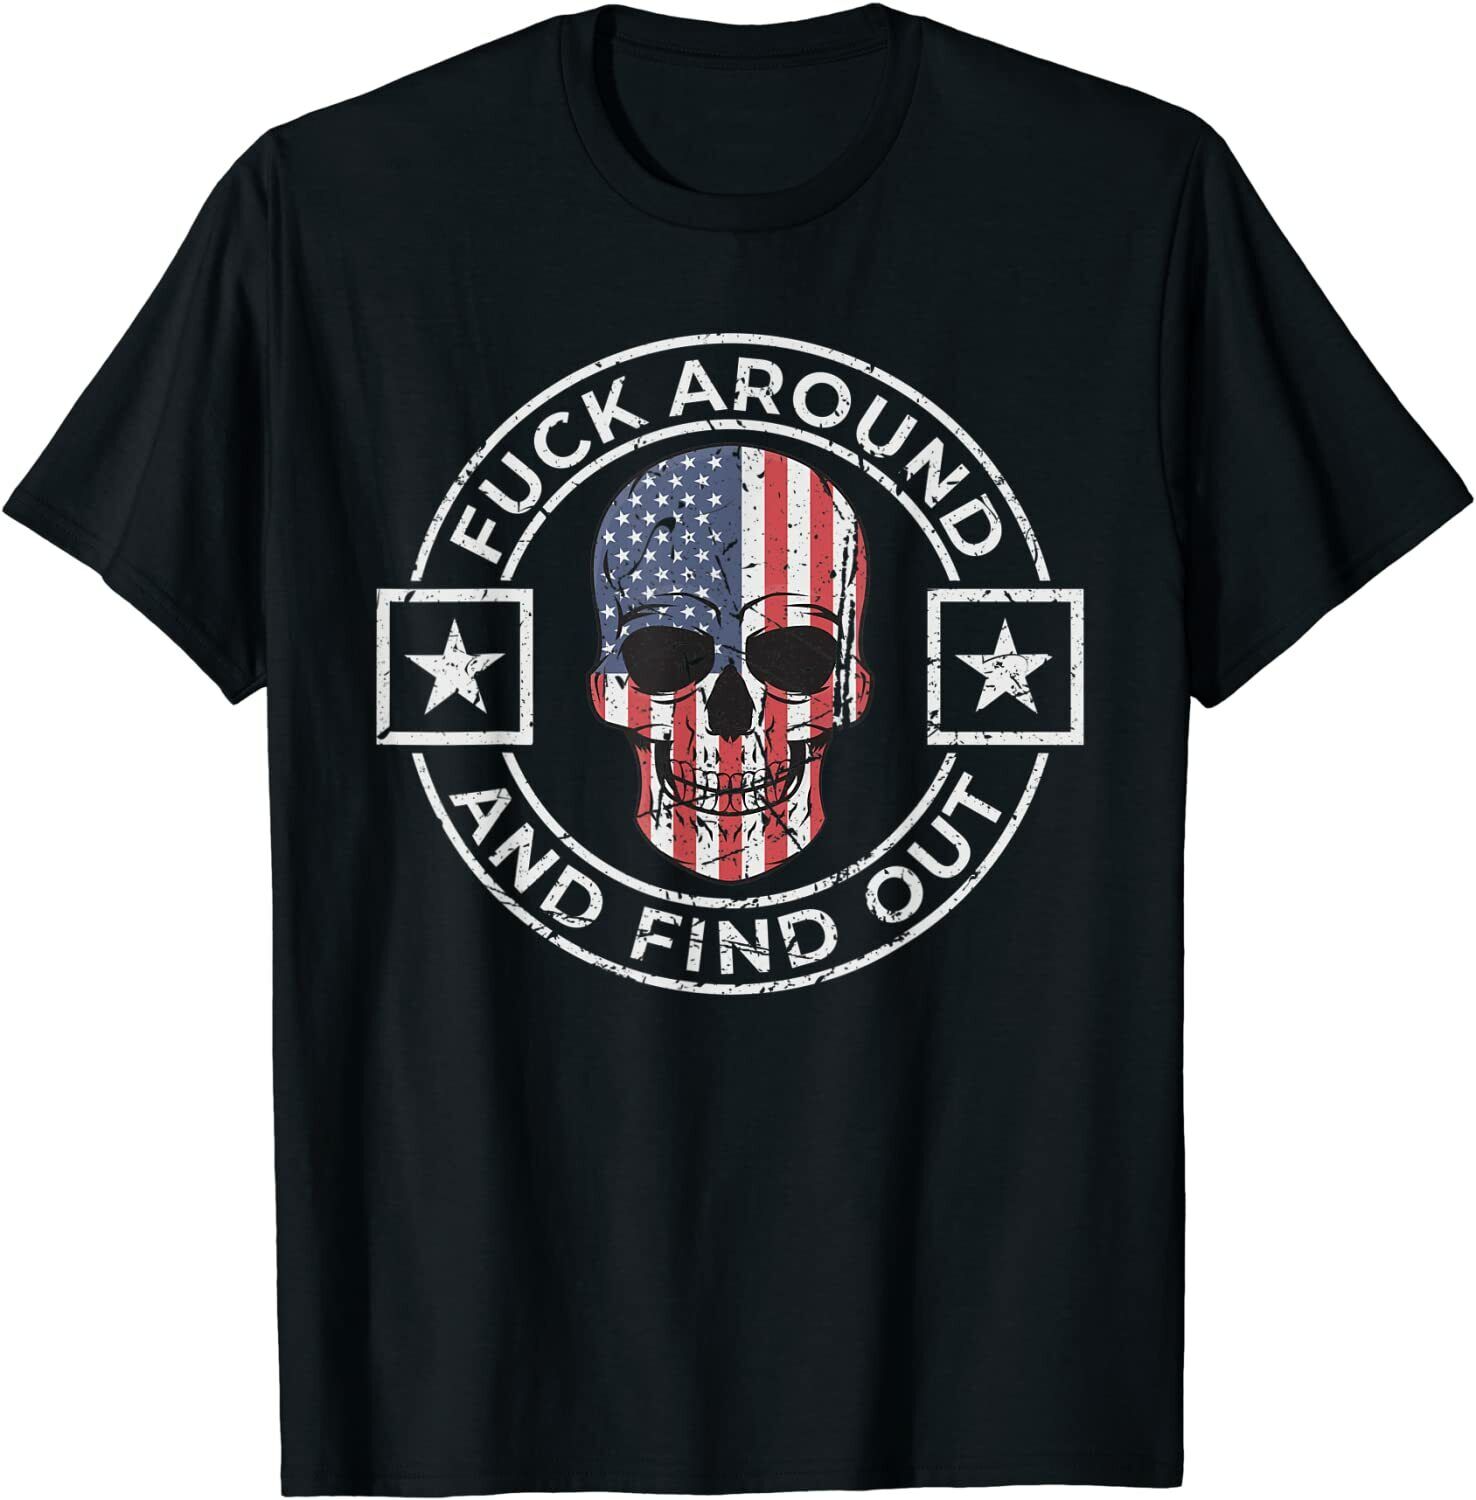 FxxK Around And Find Out Patriotic Distressed Skull Design T-Shirt